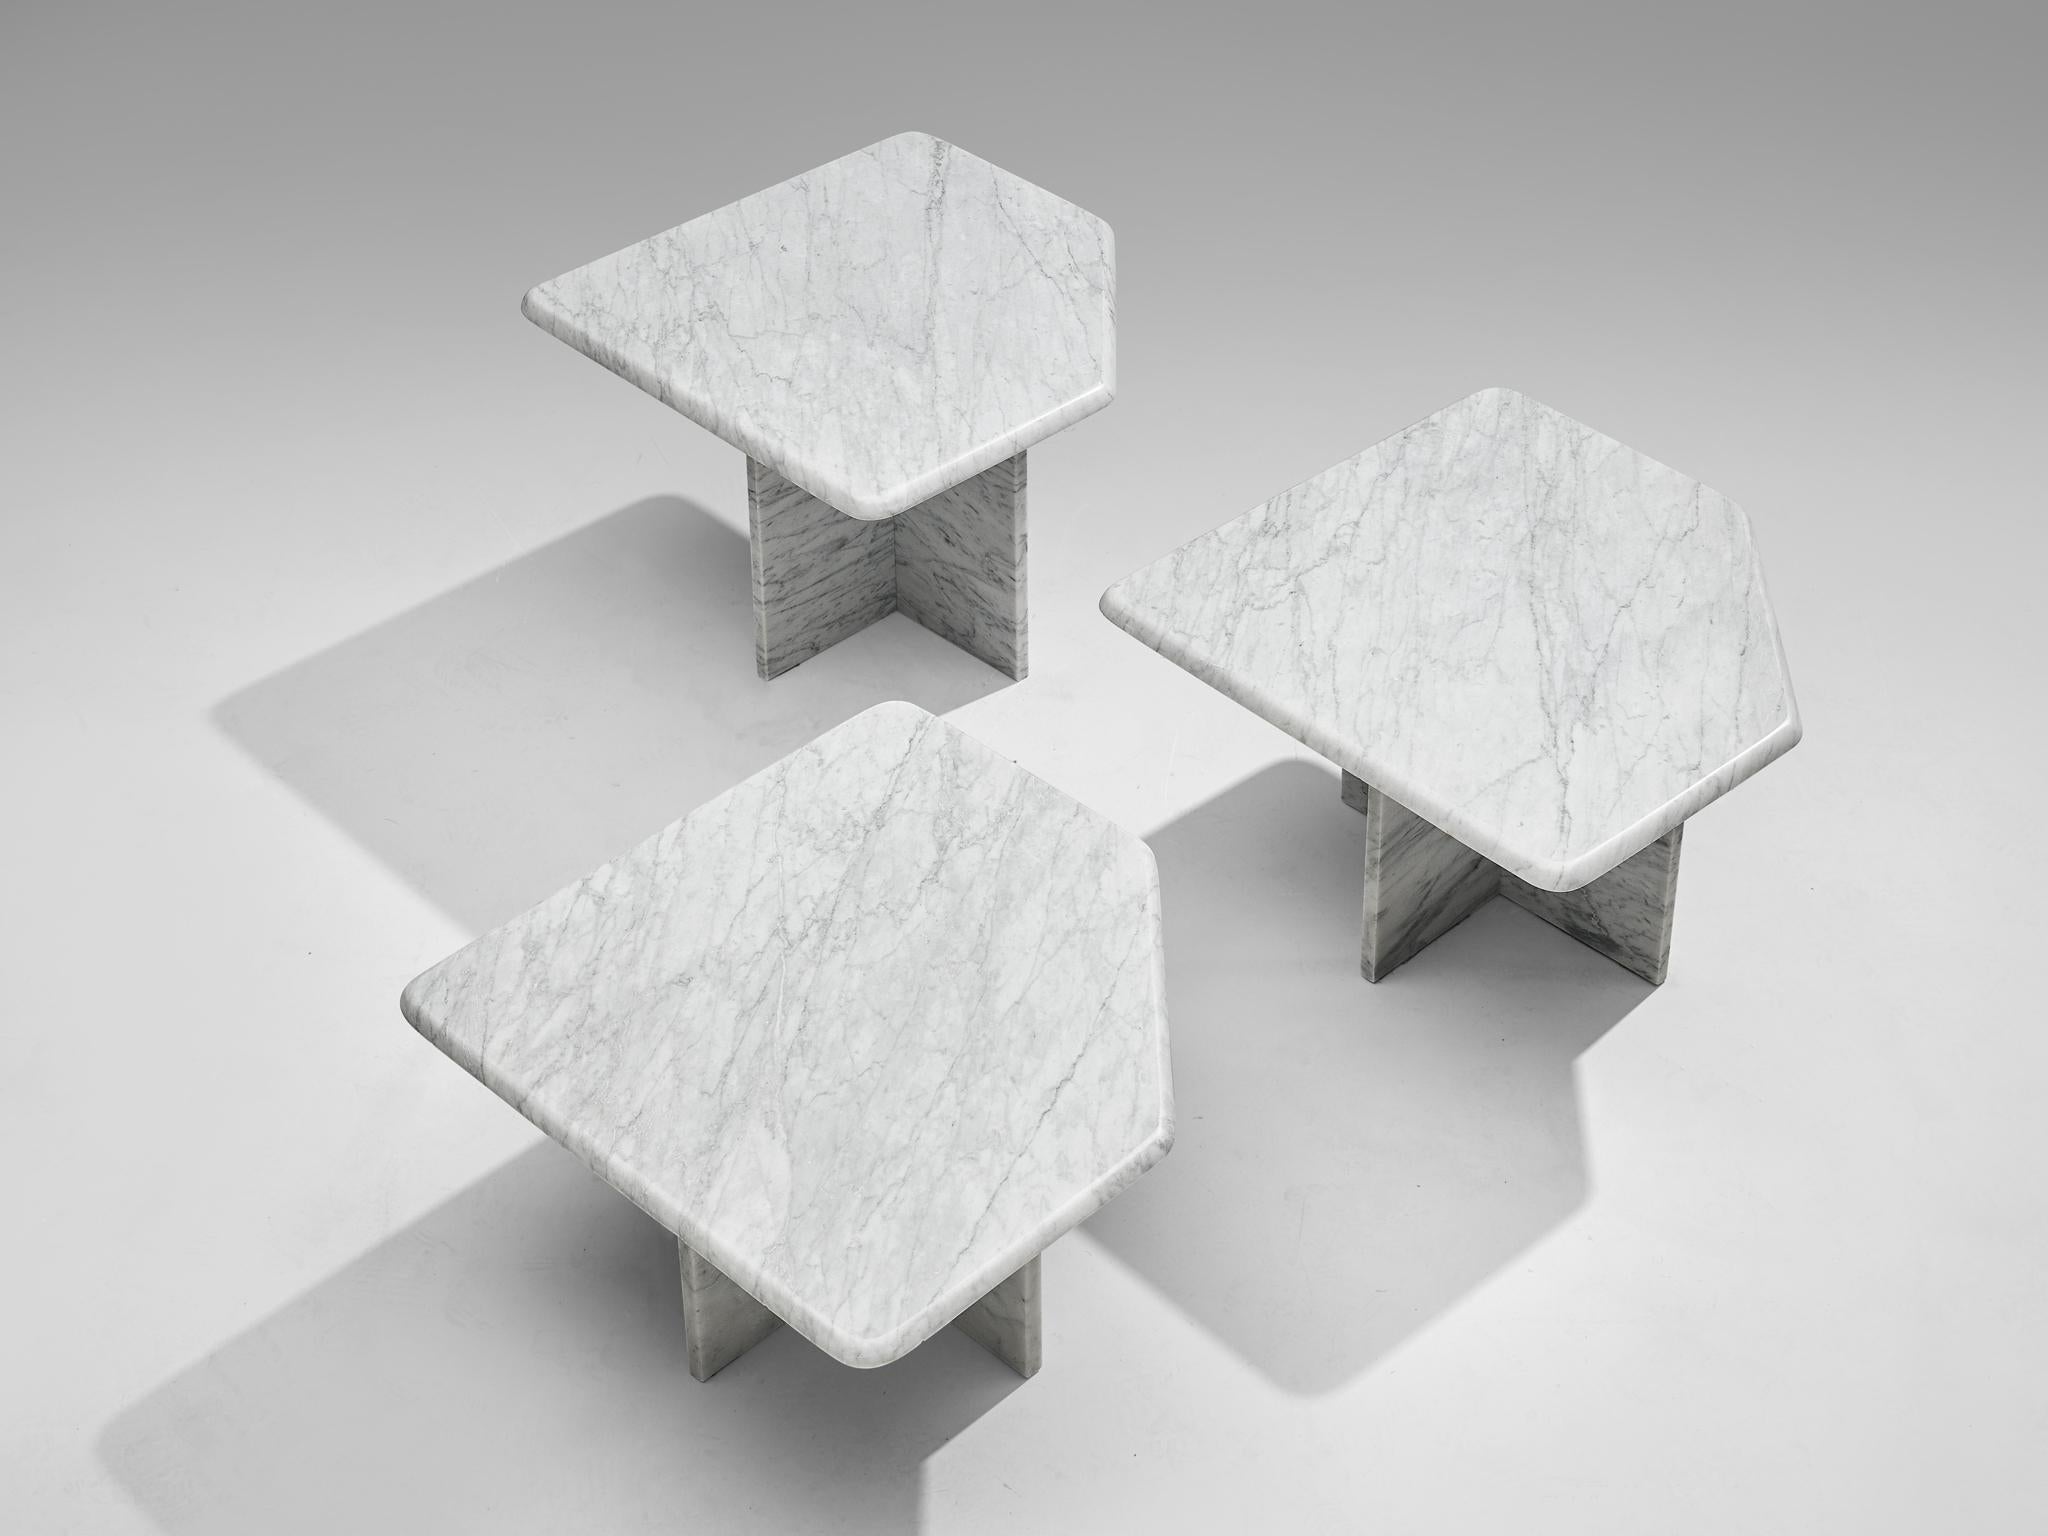 Set of three coffee tables, marble, Italy, 1970s.

This set of three geometrical marble coffee tables each feature a diamond shaped tabletop and an X-shaped base. The aesthetics are archetypical for postmodern design, bearing references to